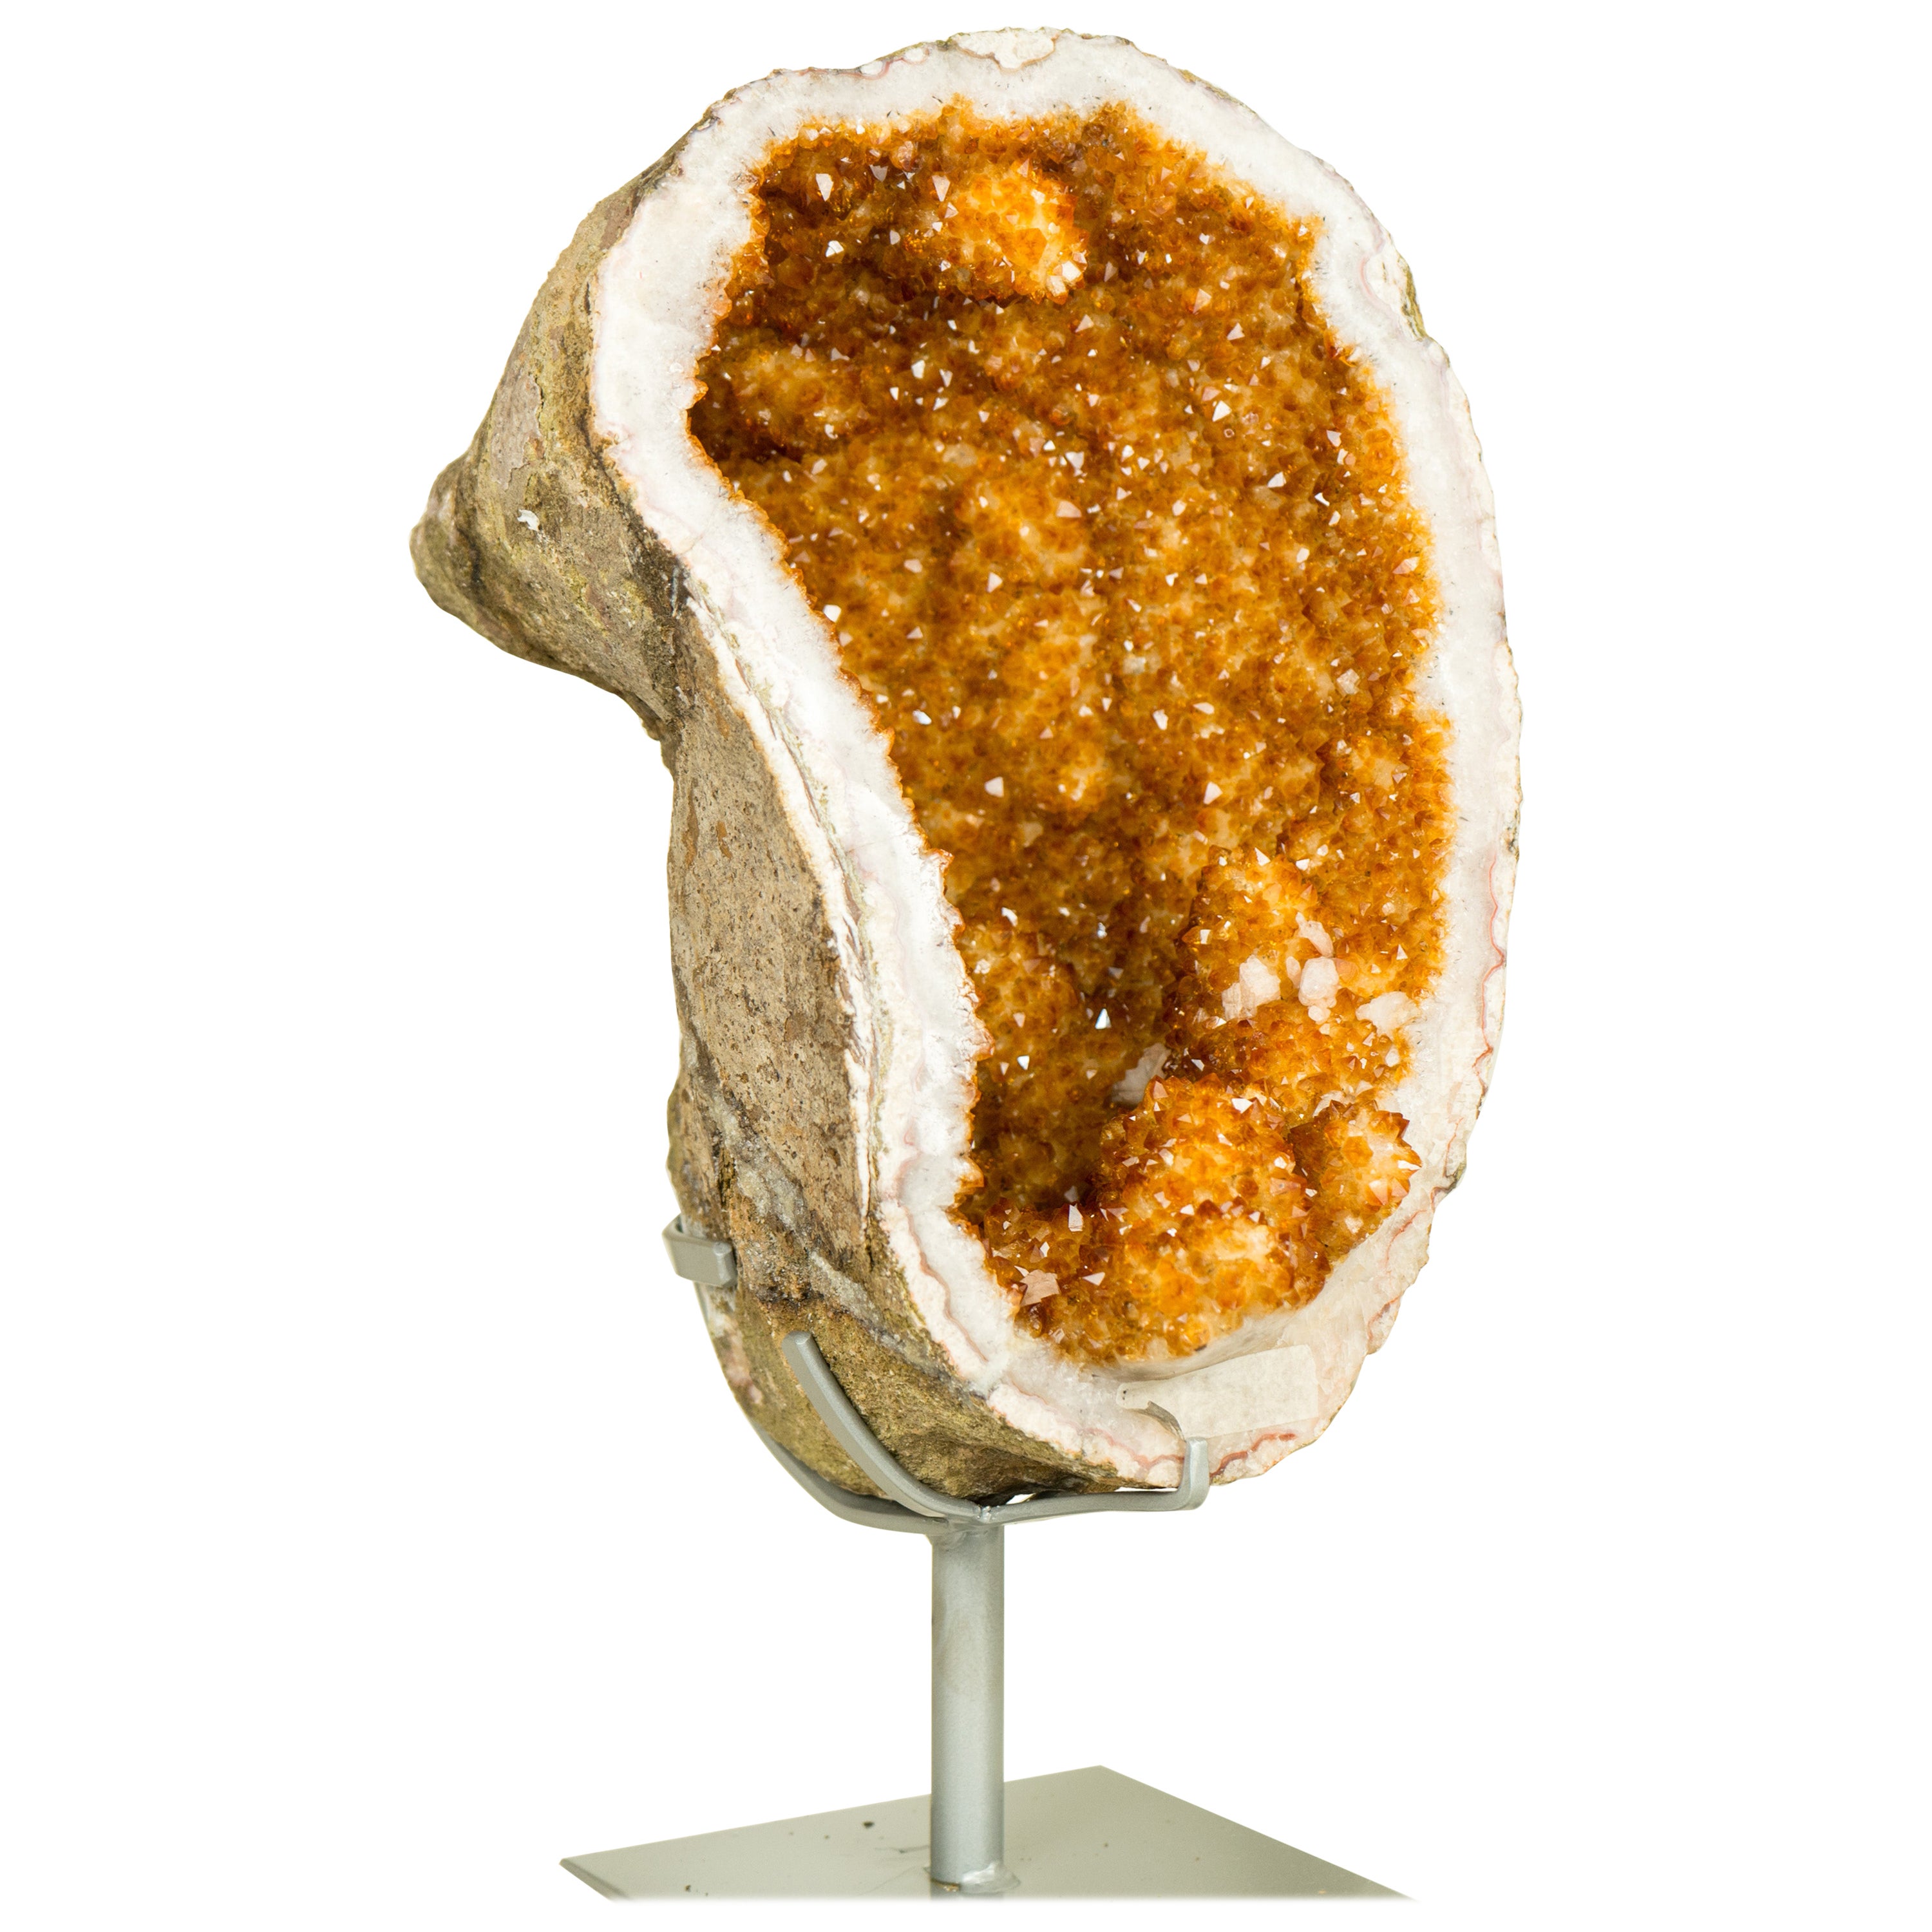 Citrine Geode with Stalactite Flower Formations and Deep Orange Citrine Crystal